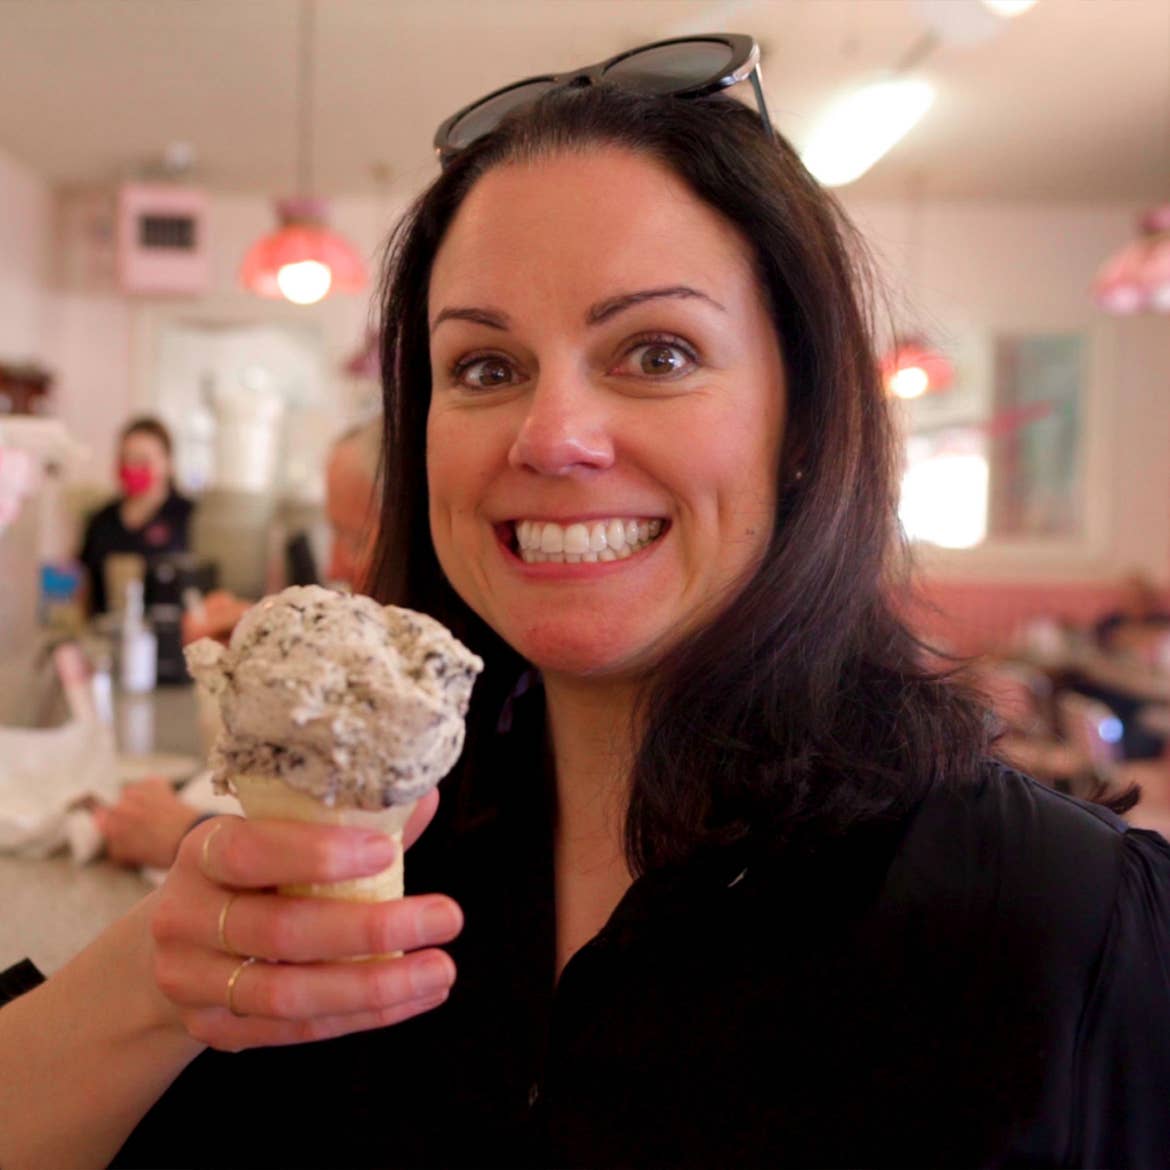 A woman wearing a black sweater and sunglasses holds an ice cream cone in a vintage diner.